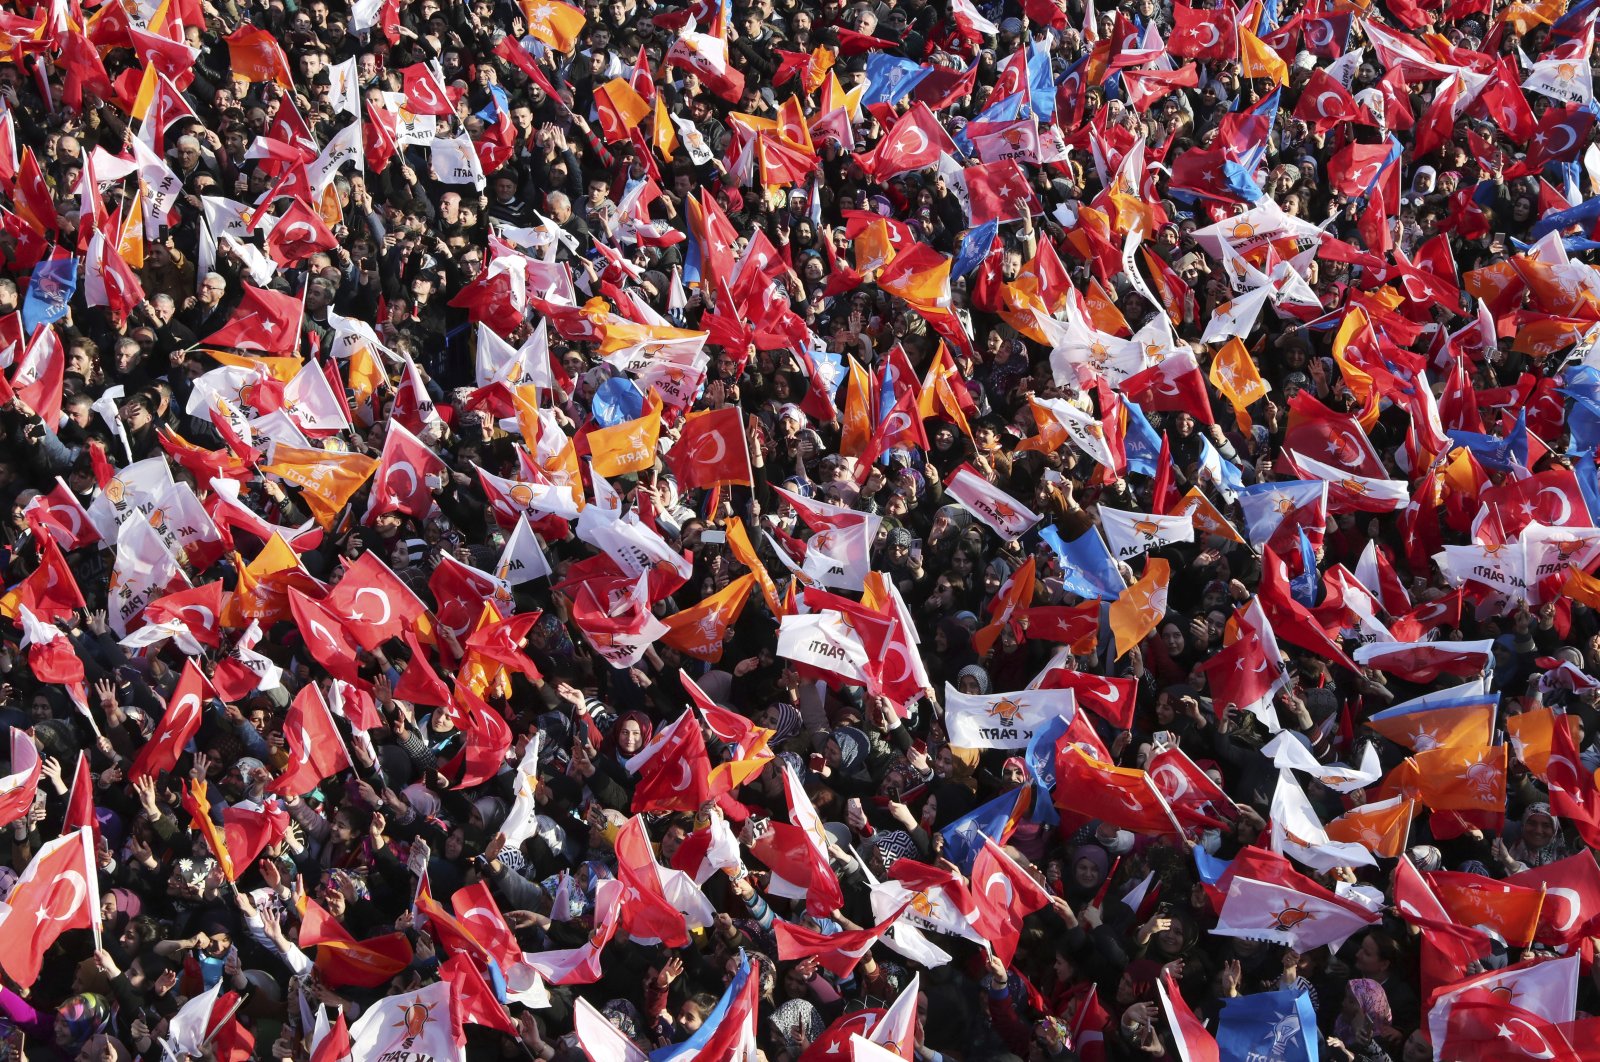 Supporters of Turkey's President Recep Tayyip Erdoğan's ruling Justice and Development Party (AK Party) wave Turkish and party flags during his speech at a rally in Bartın, Turkey, March 4, 2019. (Presidential Press Service via AP, Pool)